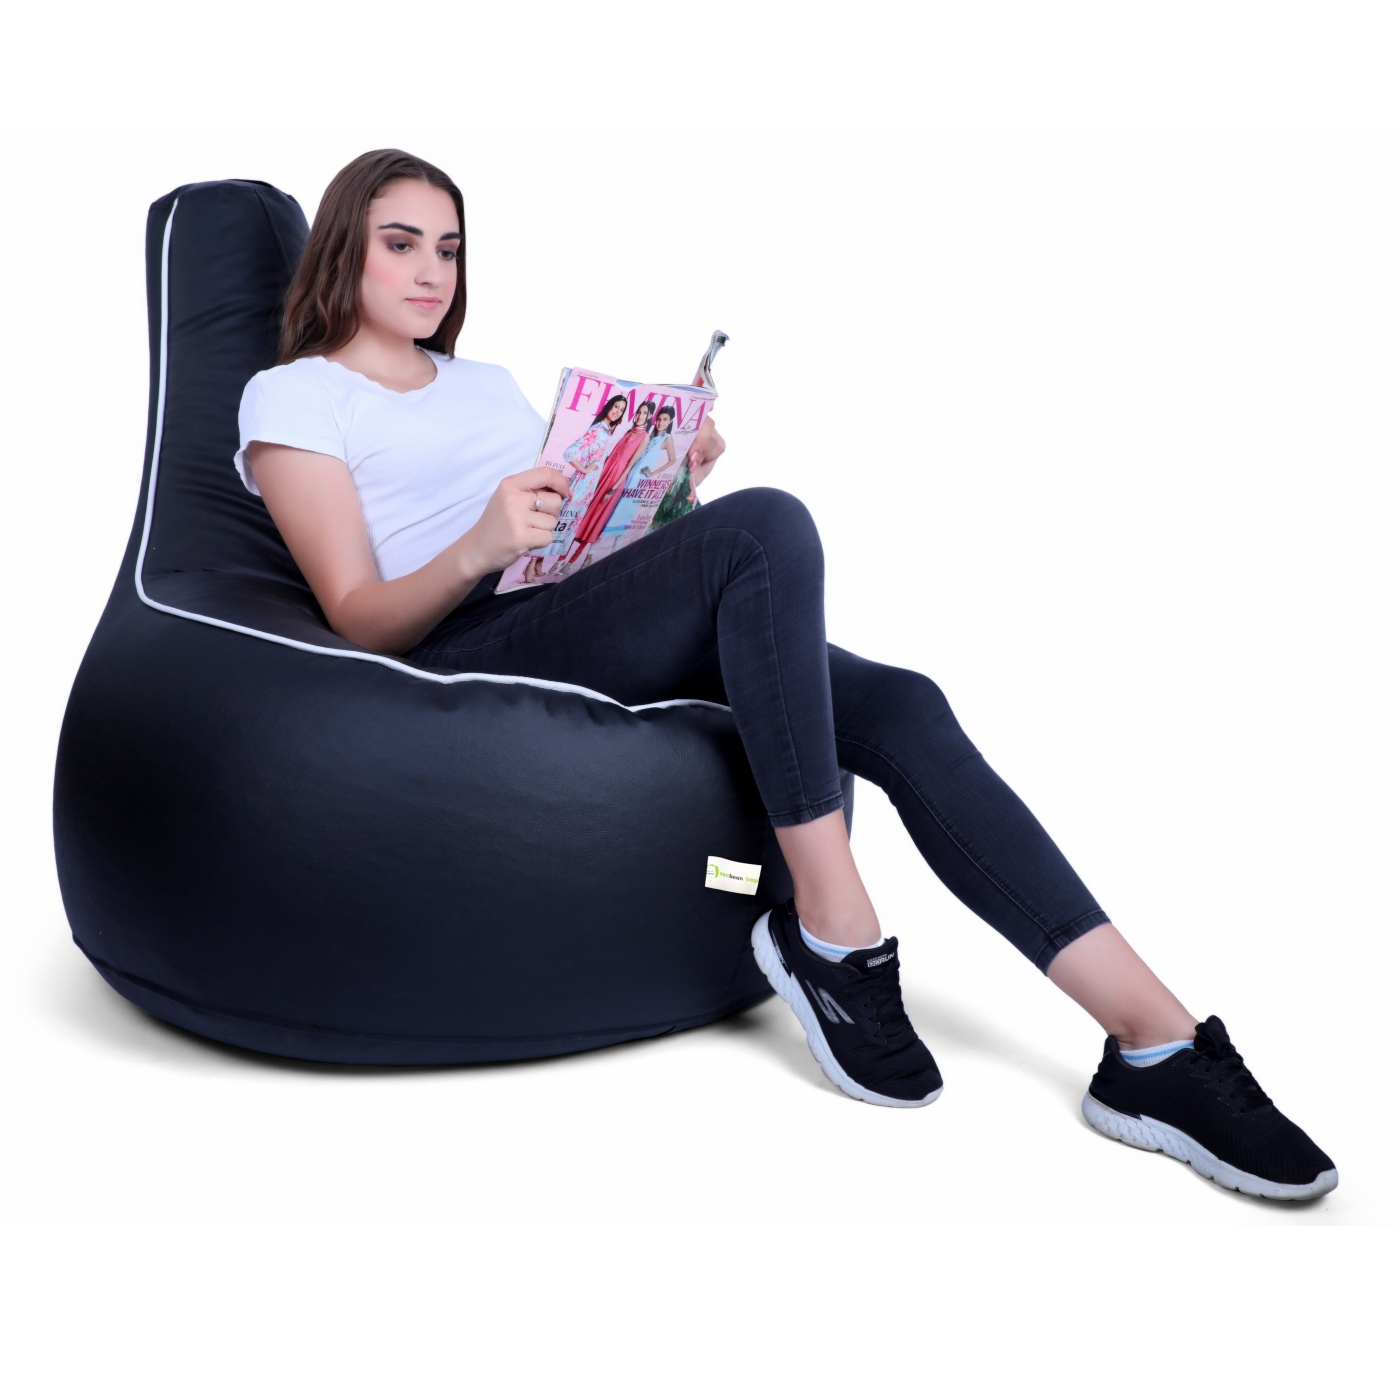 Can Bean Bags Teardrop Chair Black With White Piping  